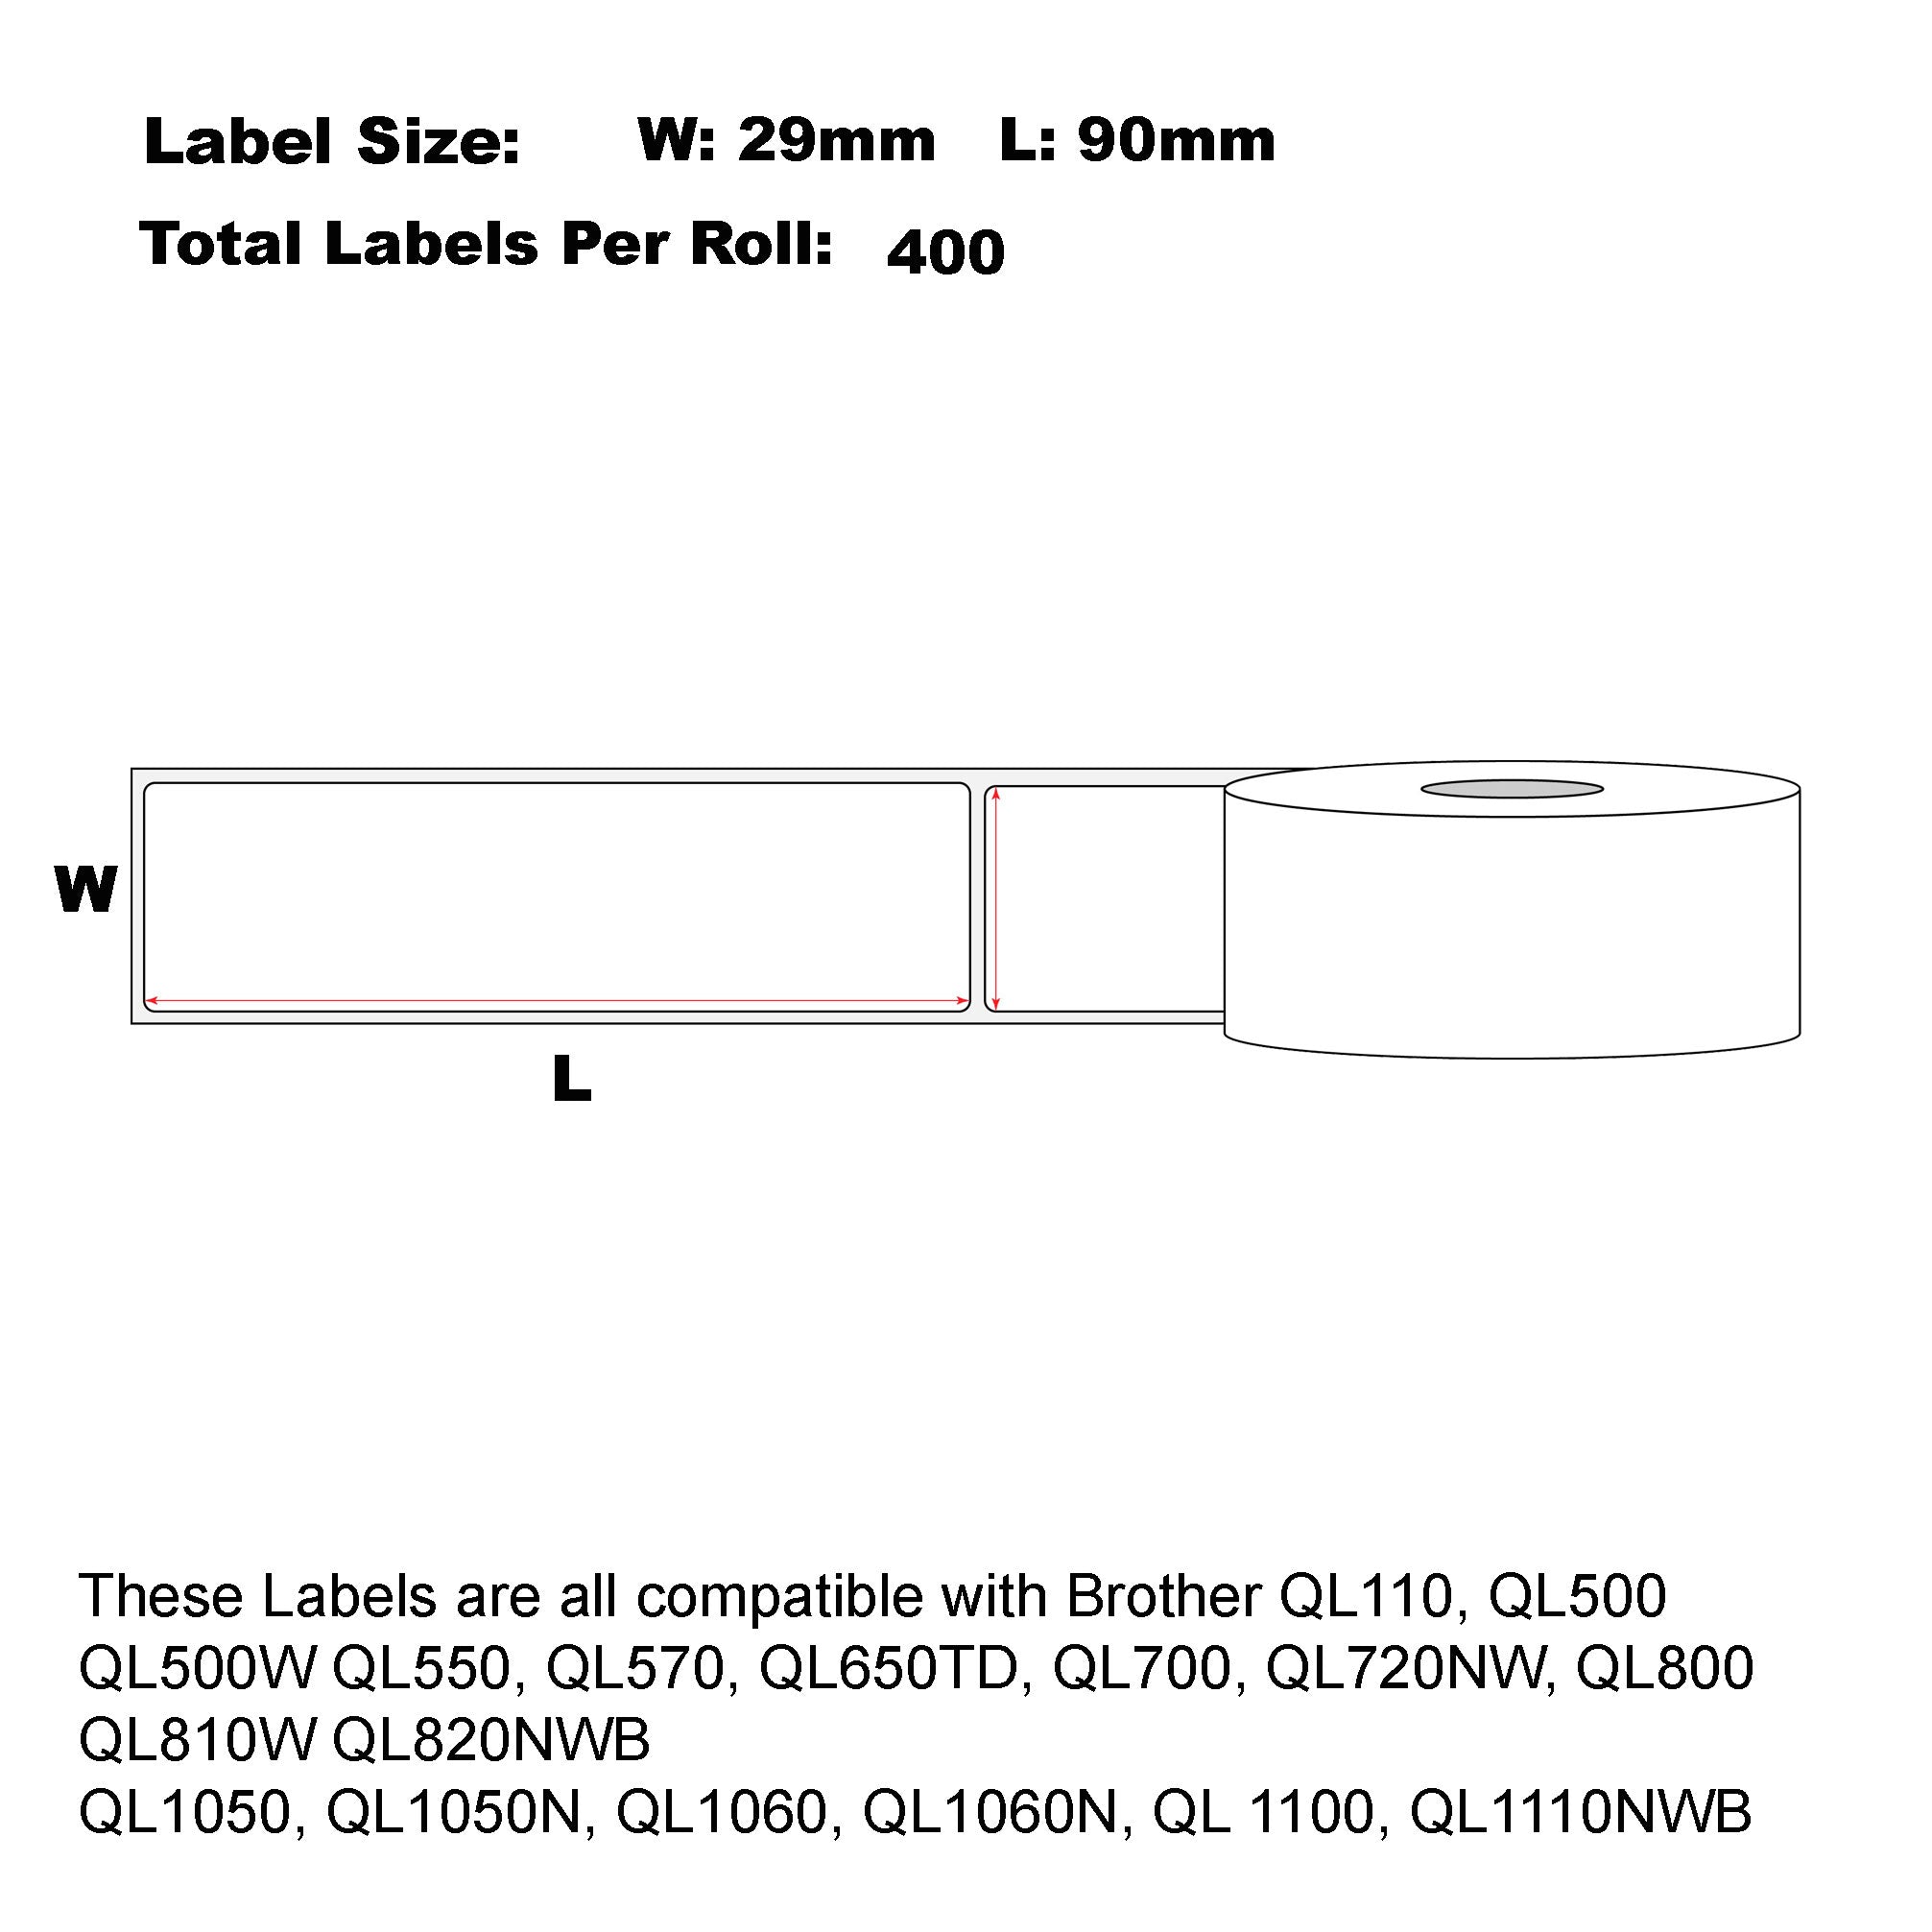 5+1 Compatible Brother DK-11201 White Refill Labels 29mm x 90mm 400 Labels Per